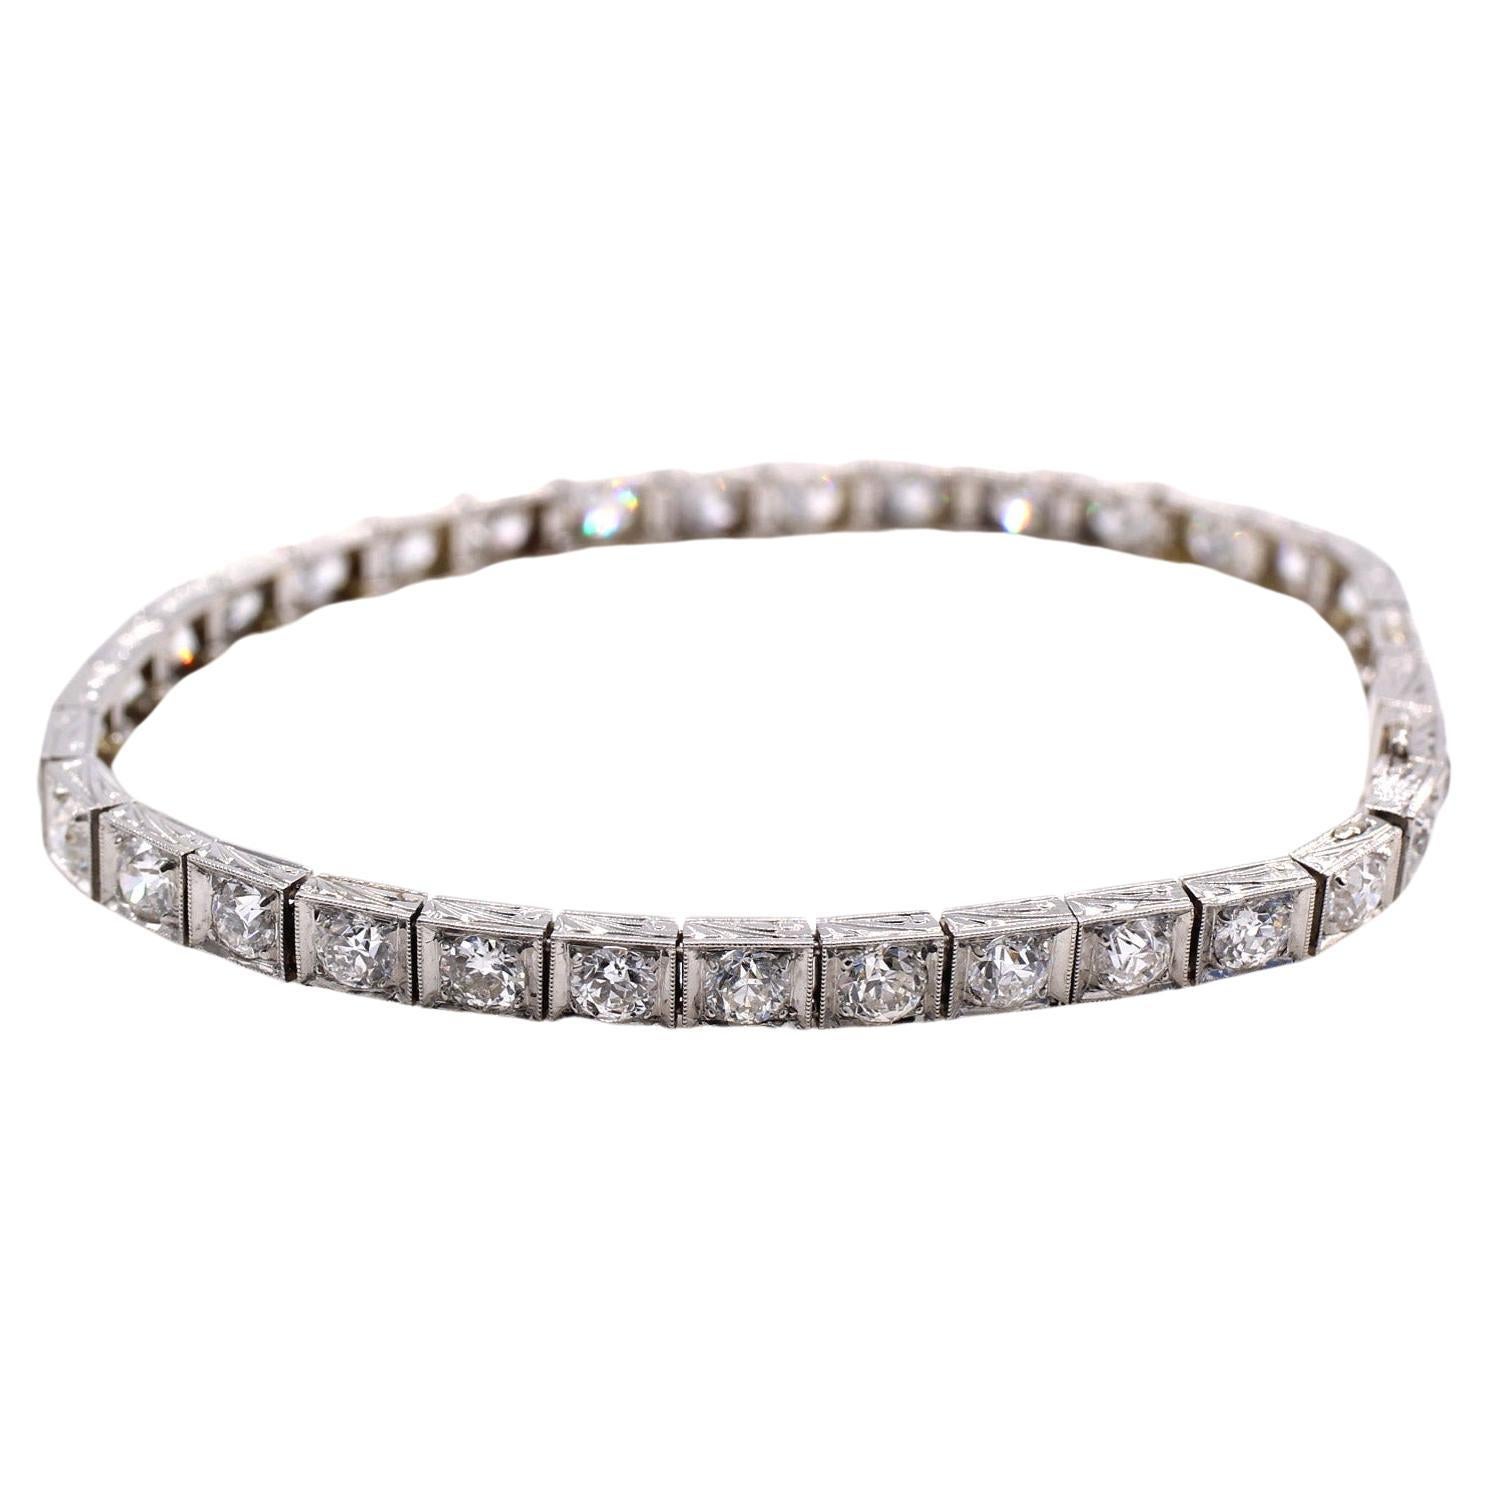 Finely handcrafted in ca. 1930 this wonderful and most wearable tennis- or straight-line bracelet features 34 perfectly matched white bright and sparkling Old European cut diamonds. The estimated total diamond weight is approximately 5.5 carats, and